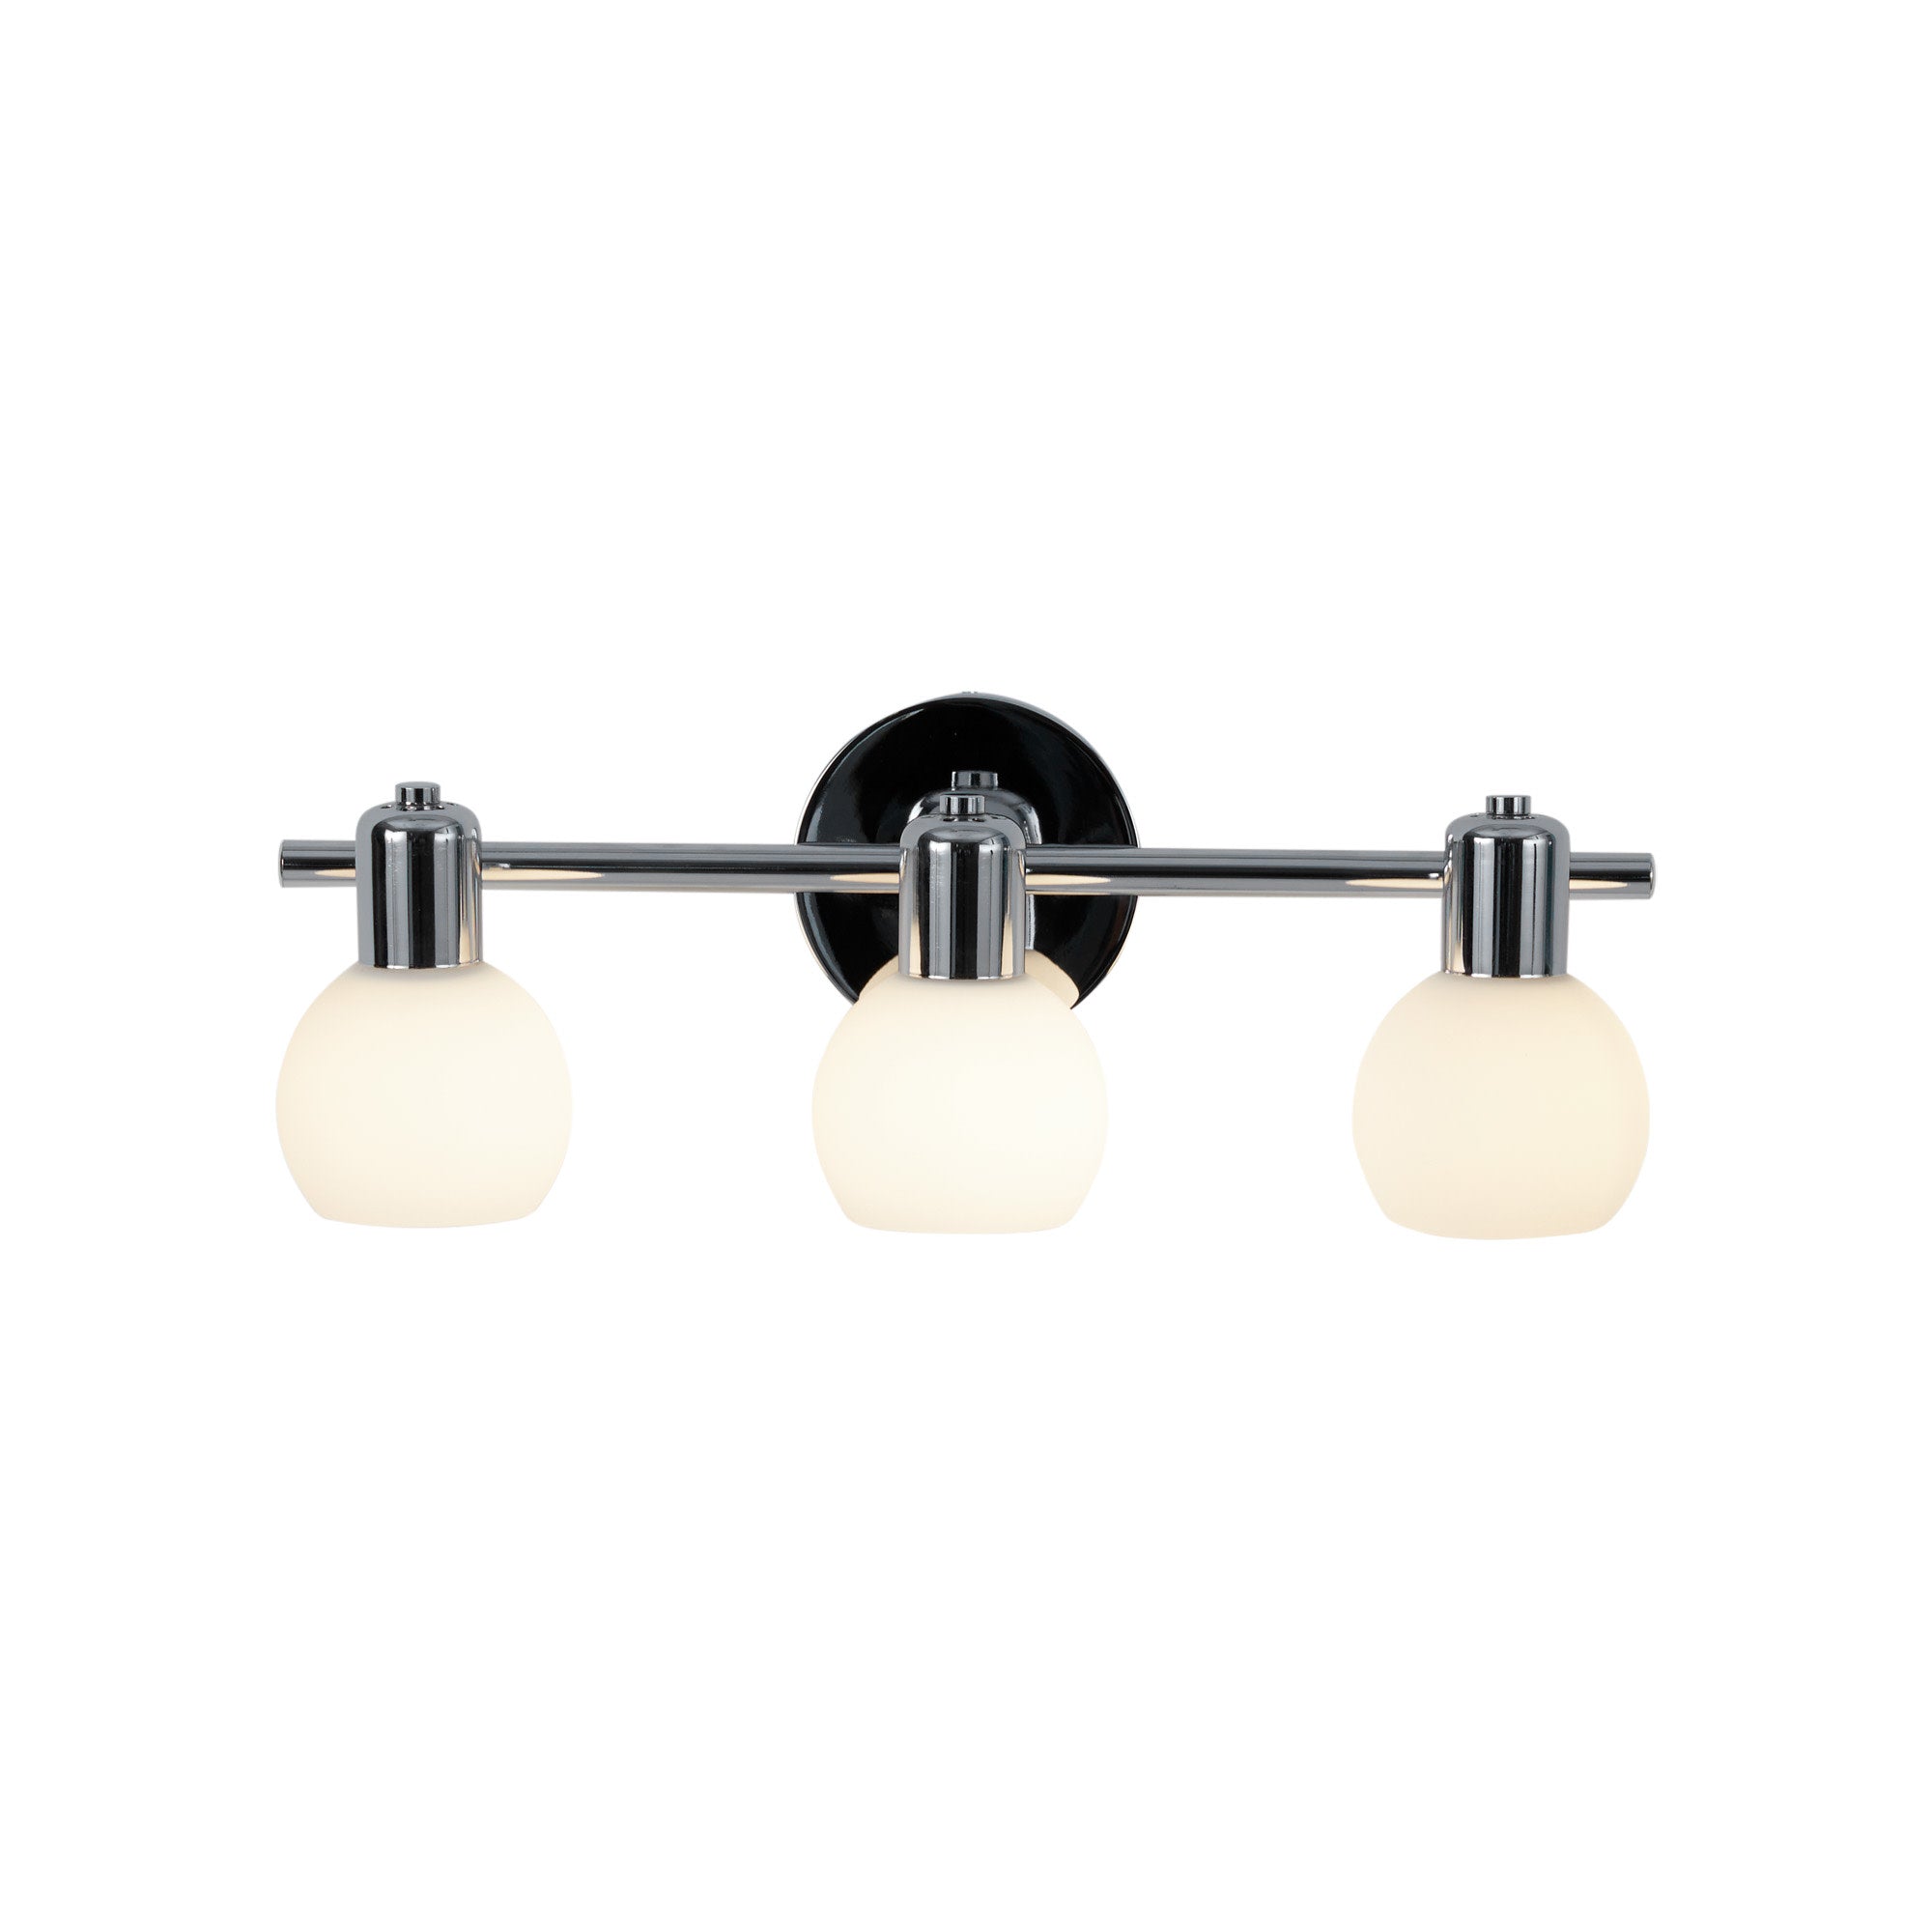 Teamson Home - 3 Light Vanity Light Frosted Glass Globe Shade